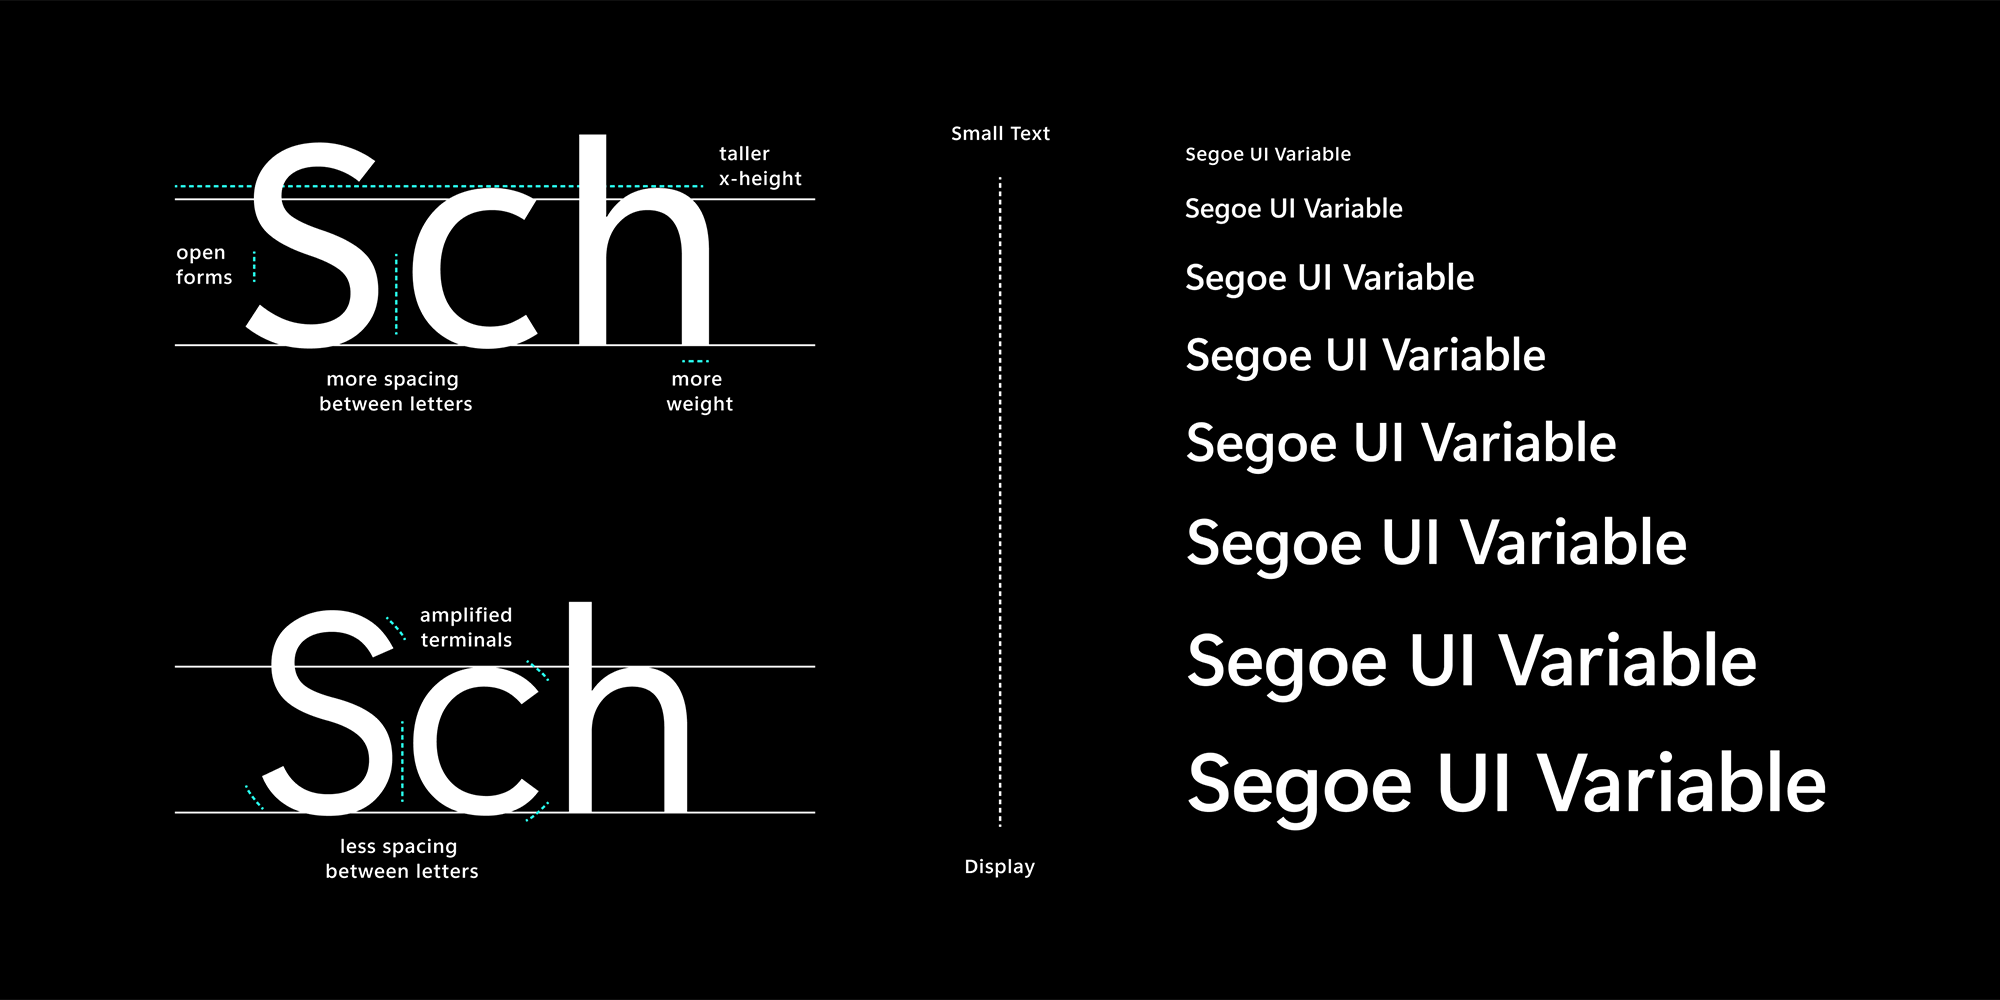 Demoing Segoe UI Variable at different sizes and pointing out the spacing differences.